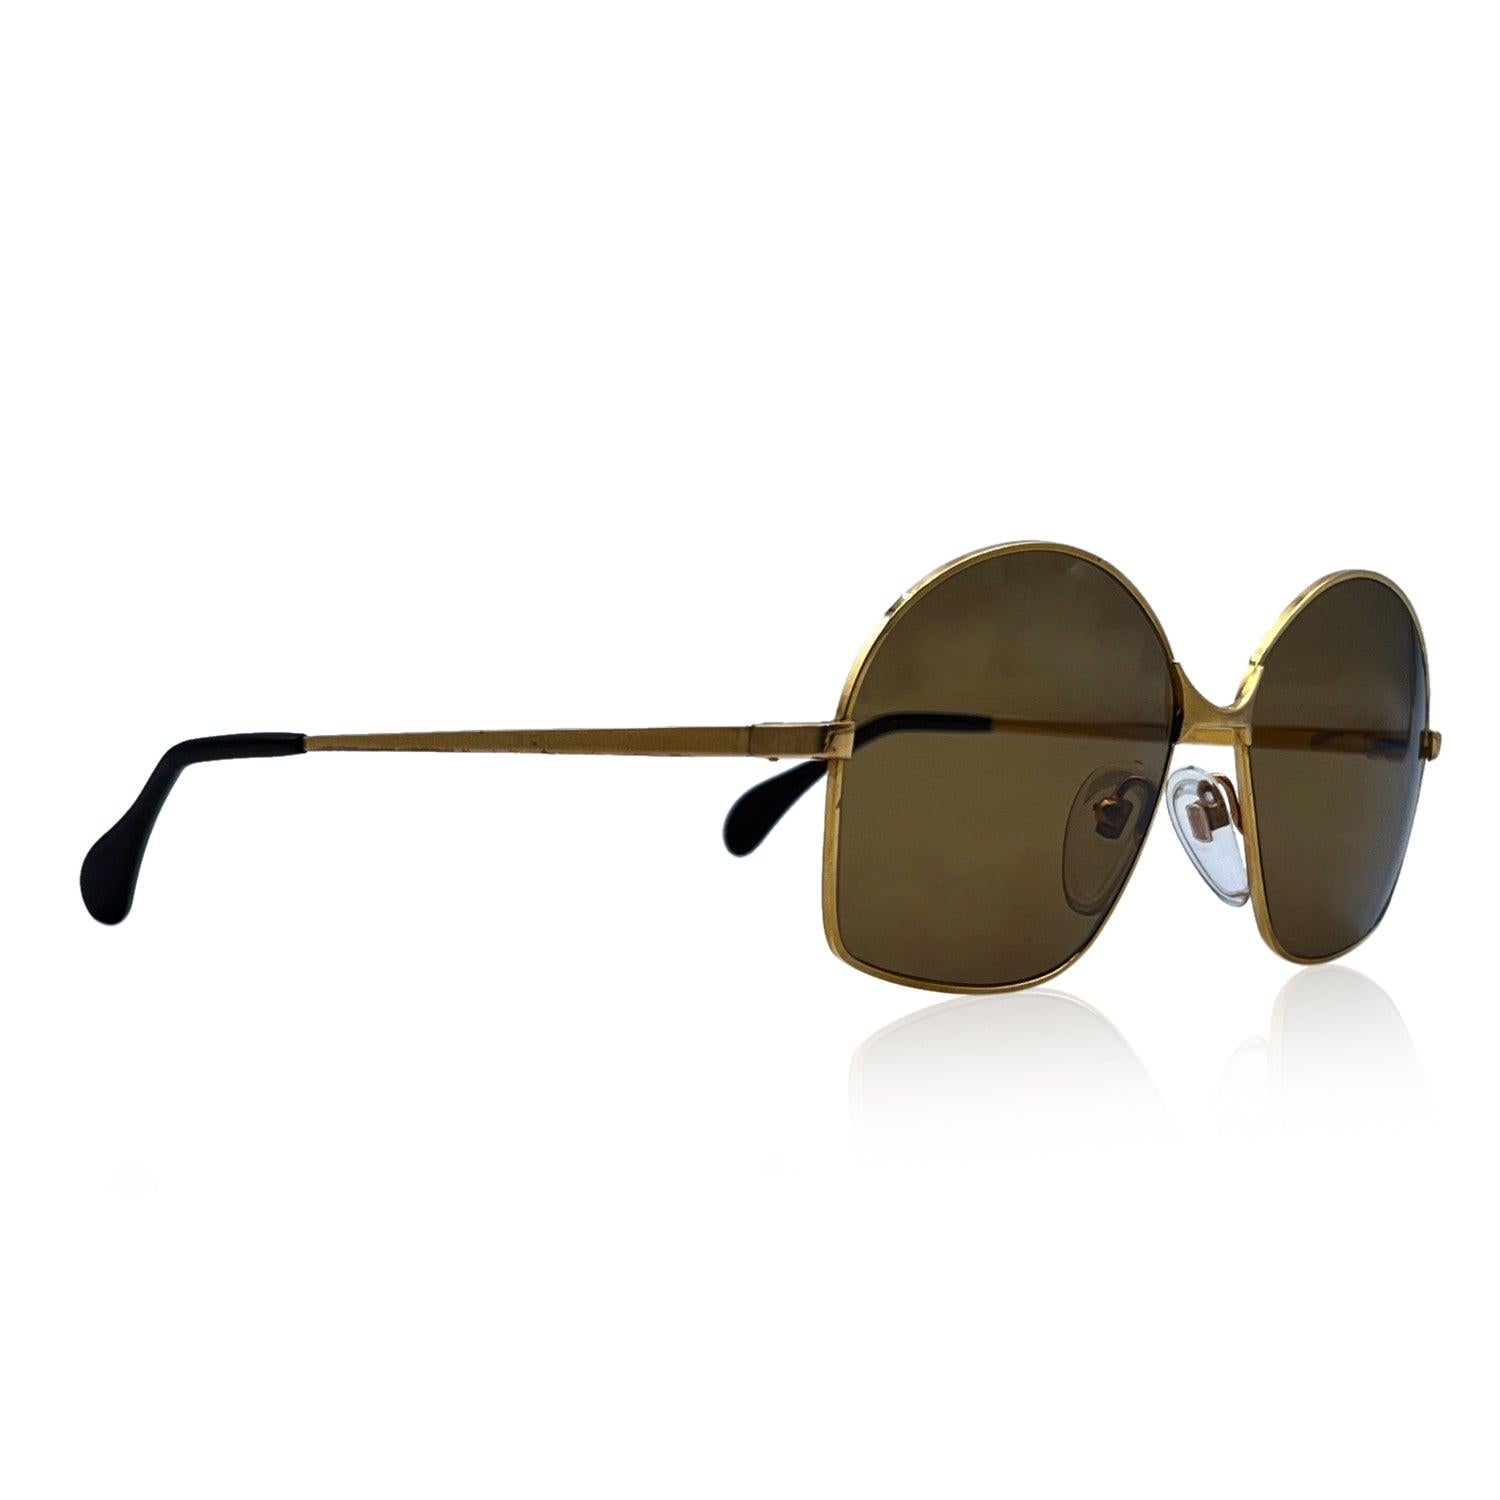 Bausch & Lomb Vintage 70s Mint Unisex Gold Sunglasses Mod. 516 In Excellent Condition For Sale In Rome, Rome